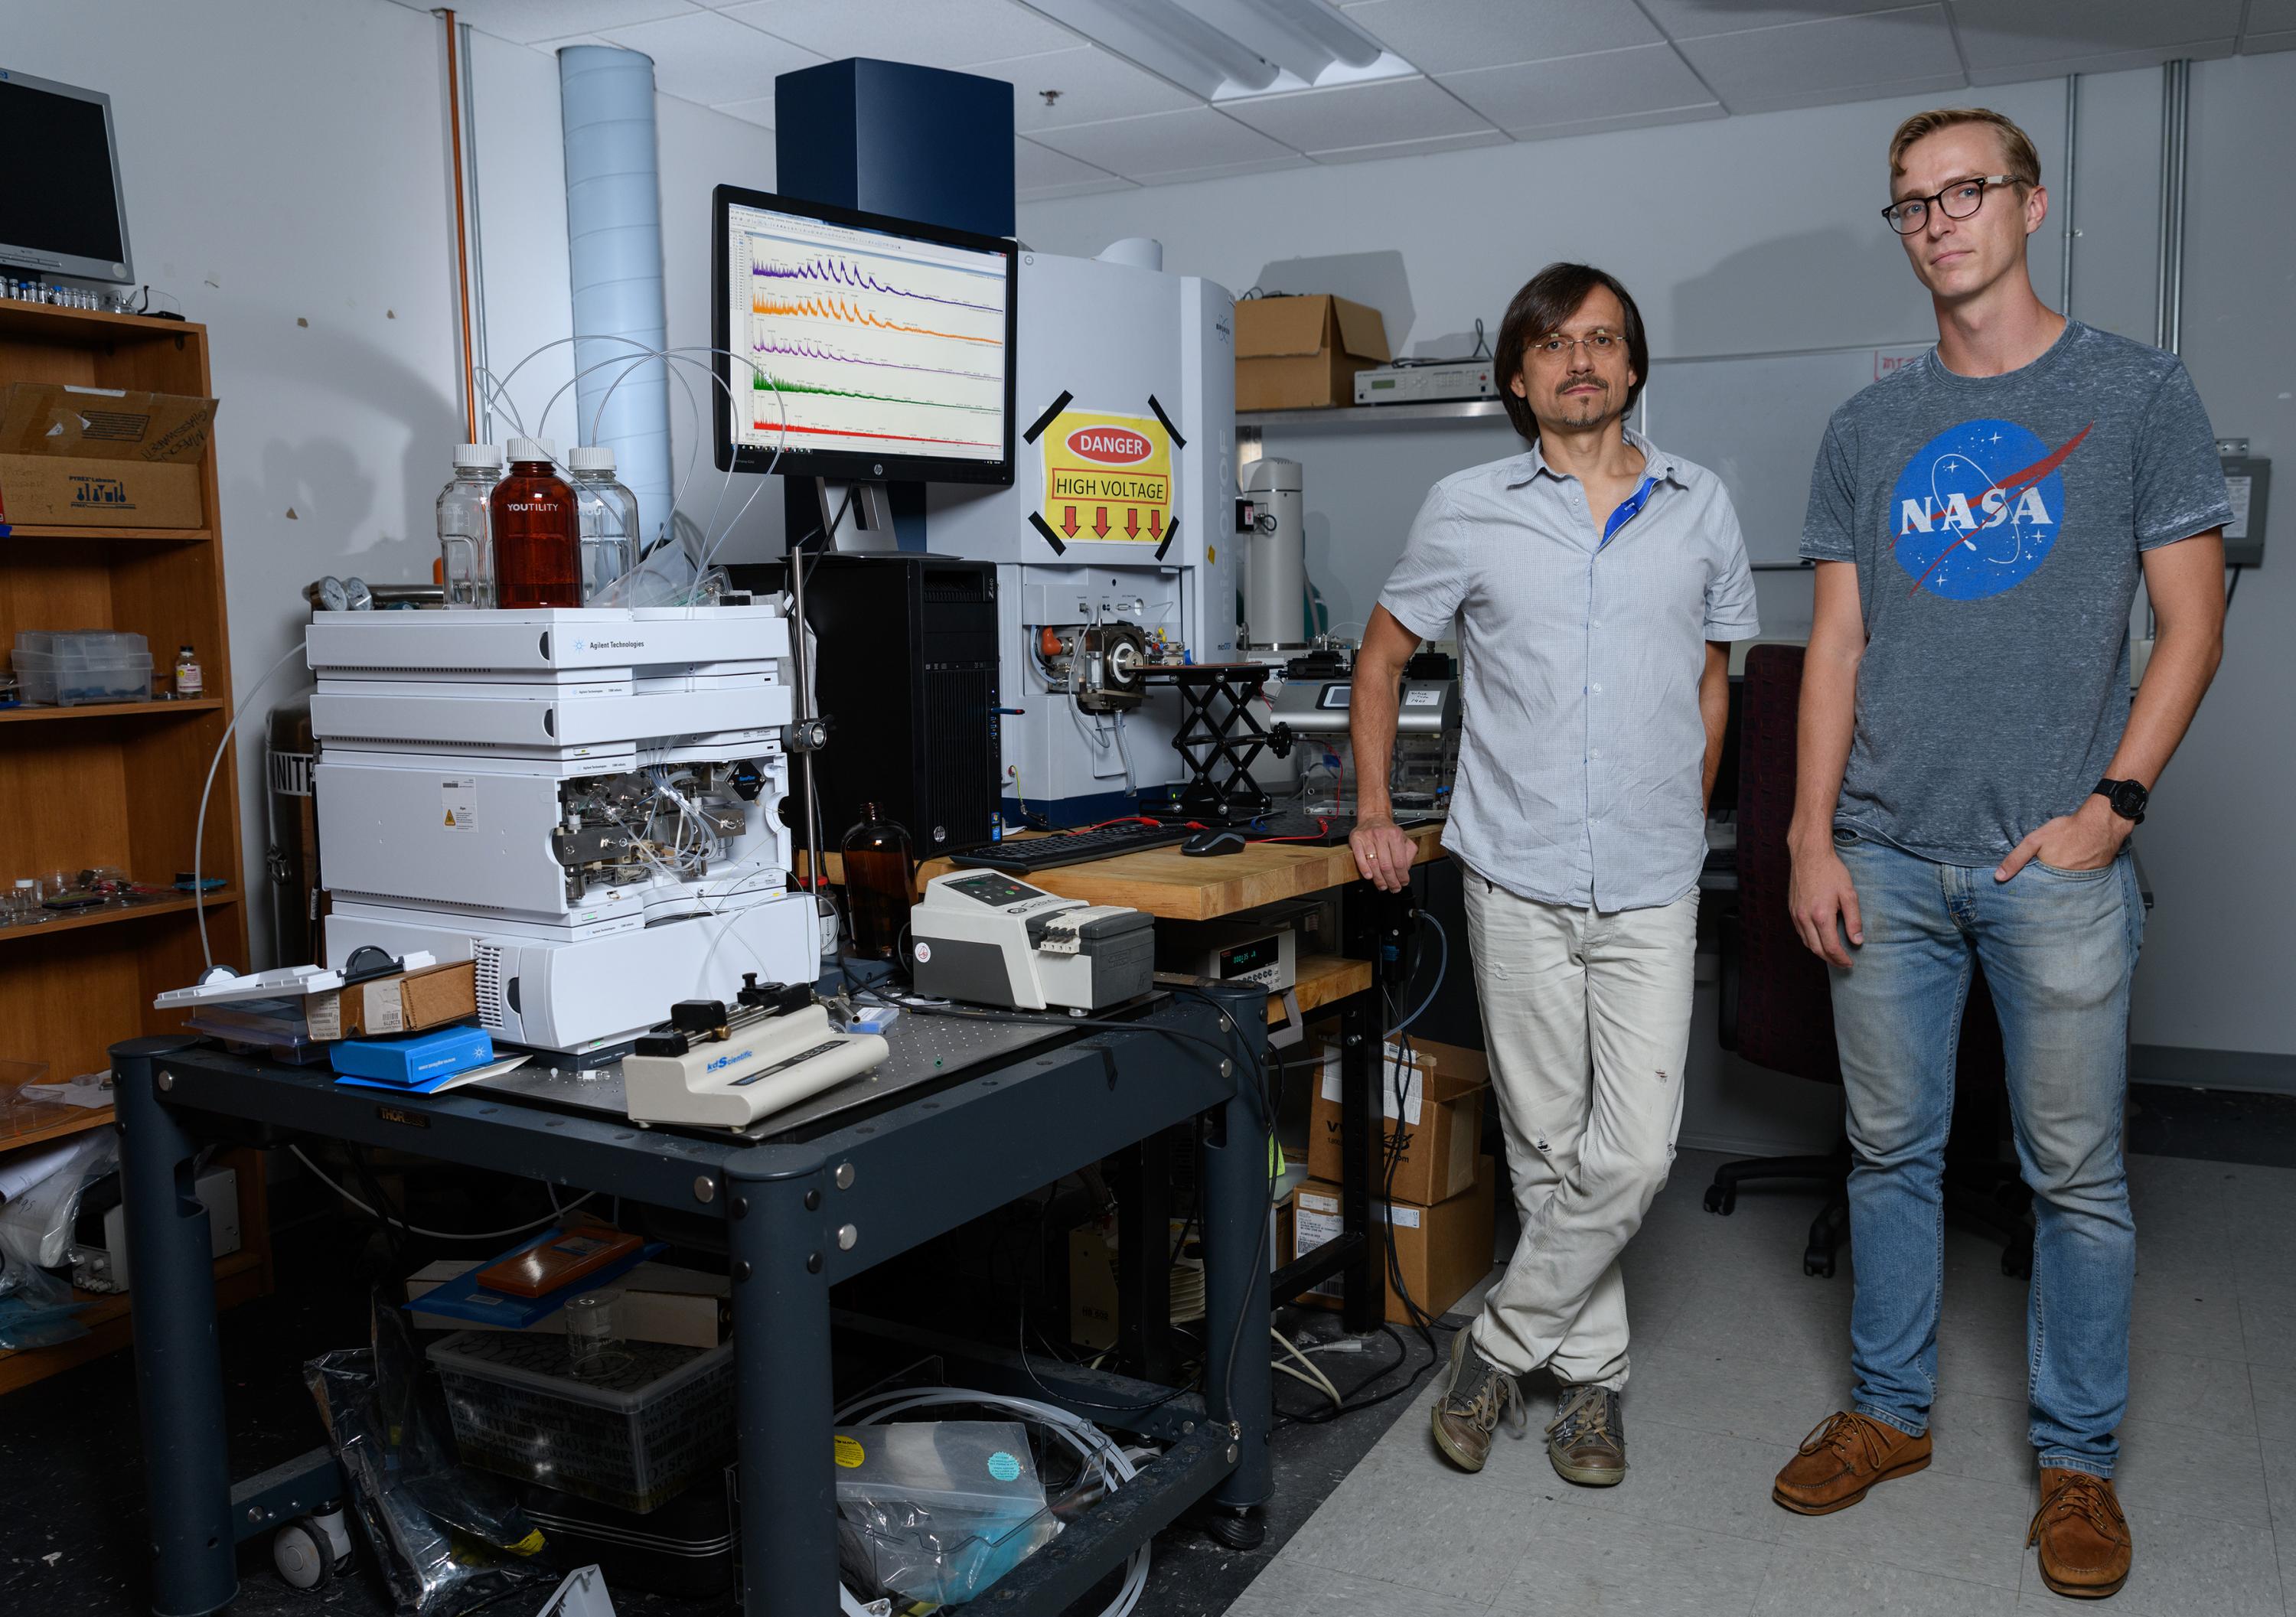 Georgia Tech researchers Andrei Fedorov and Mason Chilmonczyk are shown in a testing laboratory used to evaluate their Dynamic Mass Spectrometry Probe, which was developed to monitor the health of living cell cultures. (Credit: Rob Felt, Georgia Tech)